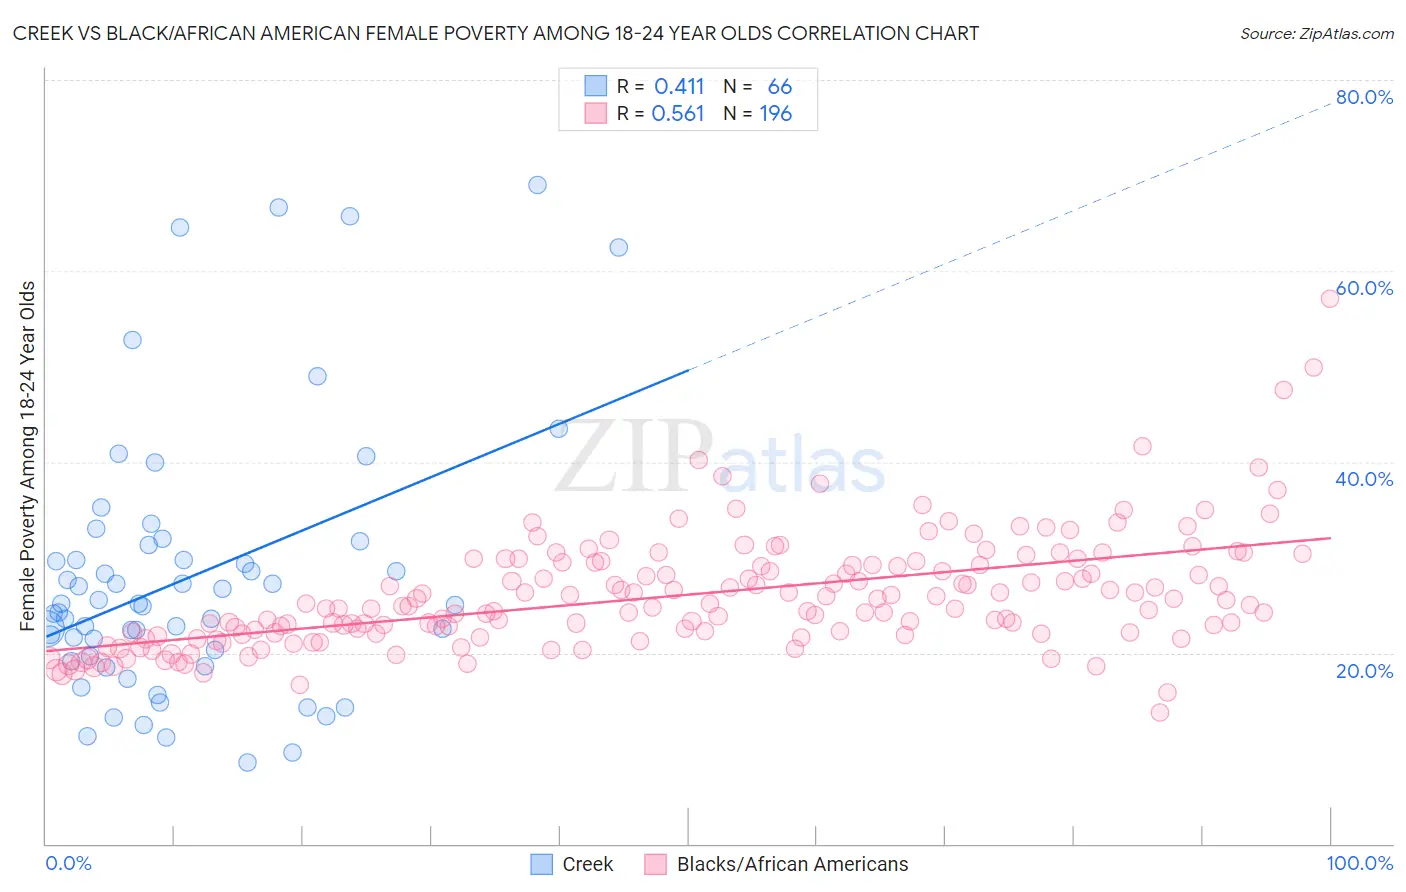 Creek vs Black/African American Female Poverty Among 18-24 Year Olds